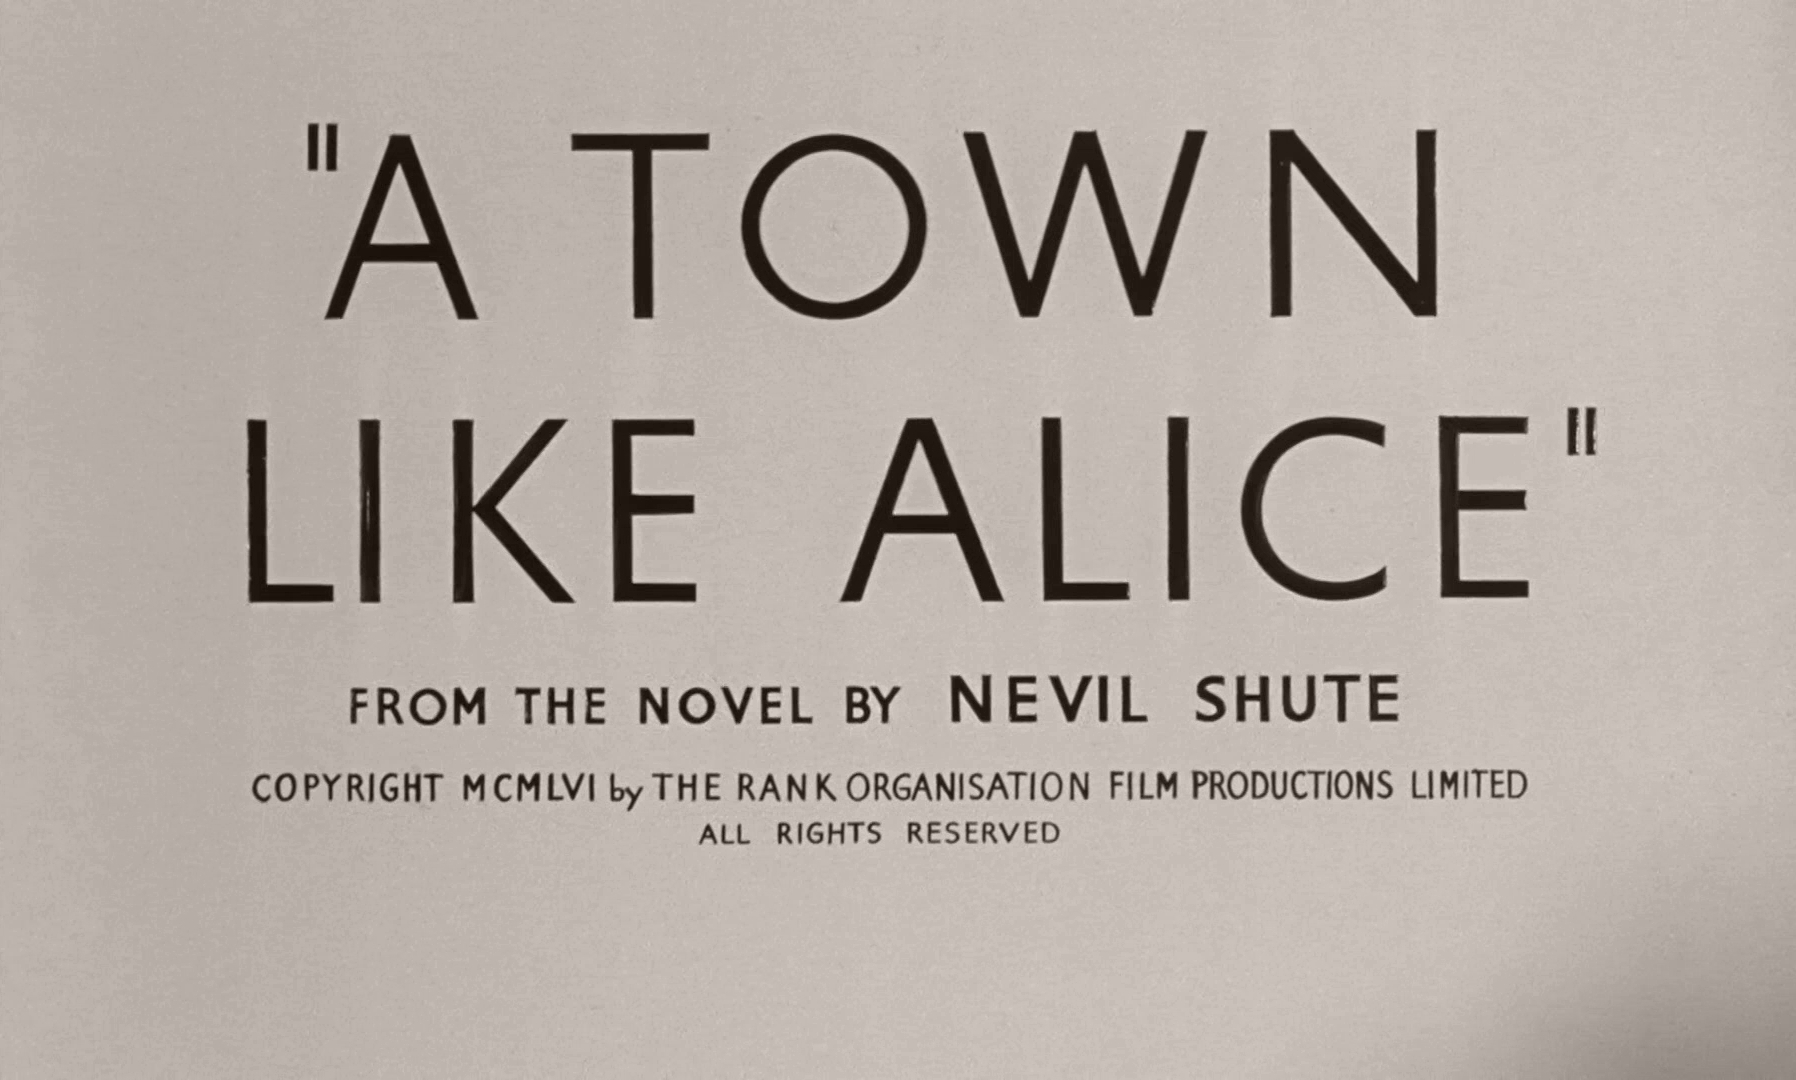 We like town. A Town like Alice 1956. Alice likes. What is your Town like.